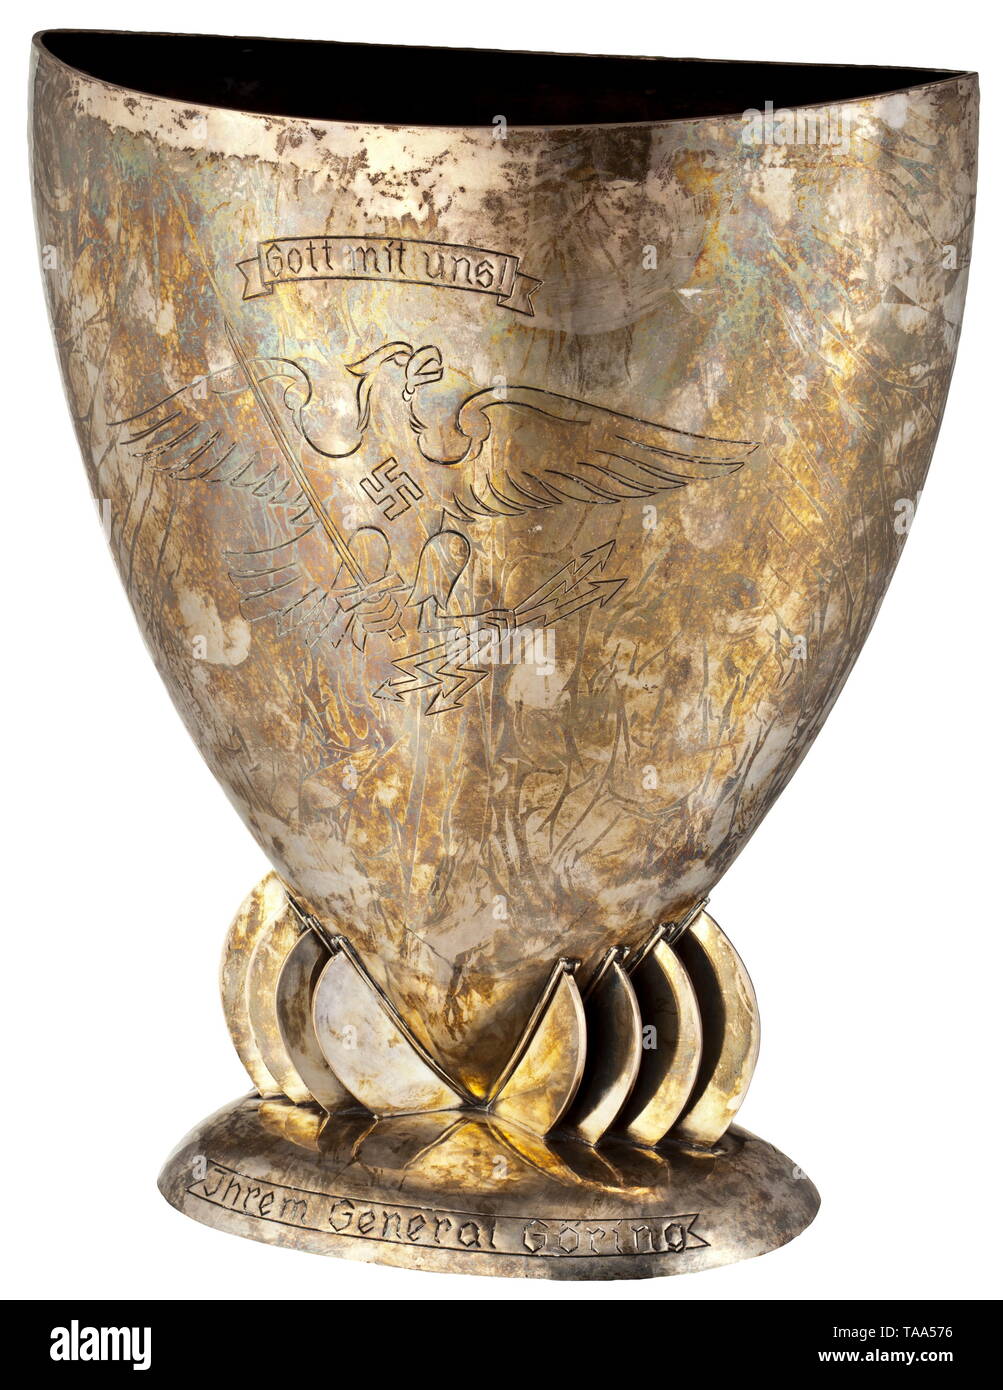 Hermann Göring - Emmy Sonnemann, a wedding present of the Prussian police force 1935 Large, hand-hammered silver vase with engraved emblem of the Prussian police with banner (tr.) "God with us!" and the dedication inscription (tr.) "To our General Göring - 10 April 1935 the Prussian Police". Master mark "HJ Wilm Berlin", master monogram "FR", on the base the company mark "H.J. Wilm Berlin", (tr.) "hand beaten" and "925", height 38 cm, width 33 cm, weight 3600 g. Provenance: Keith Wilson Collection, Kansas City. Göring's wedding with the famous actress Emmy Sonnemann was one, Editorial-Use-Only Stock Photo